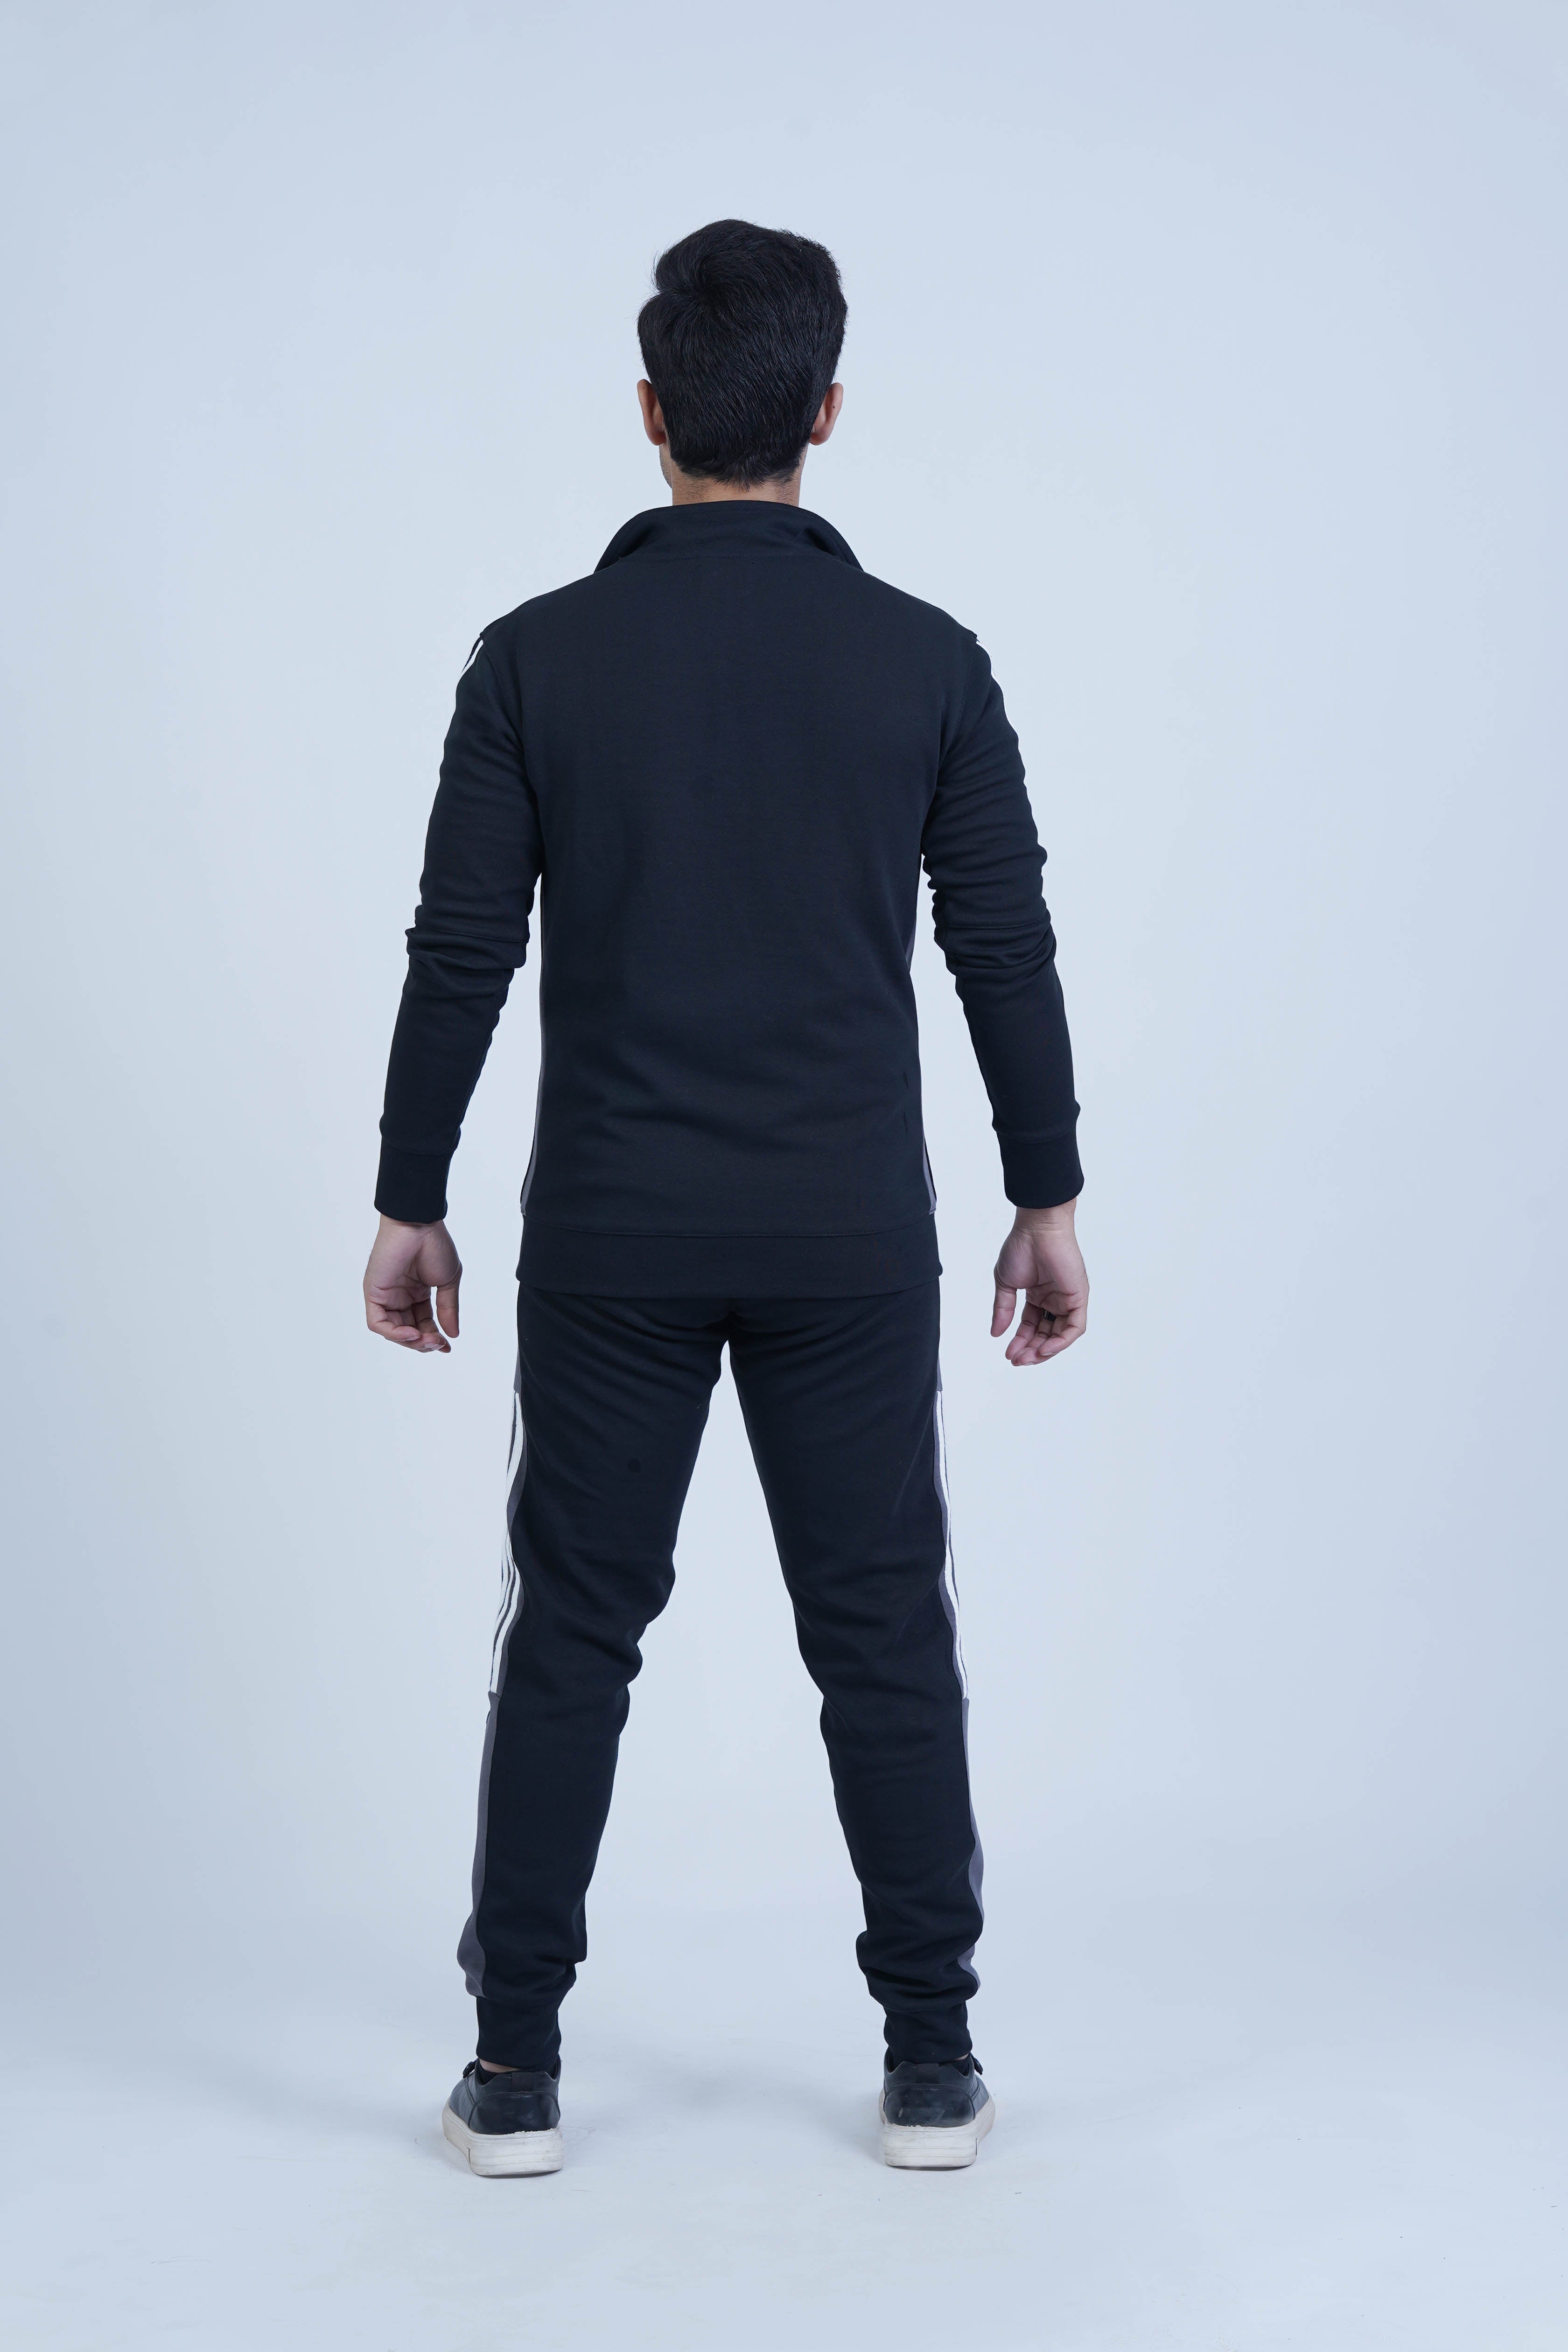 The Xea Dynamic Pro Tracksuit for Men